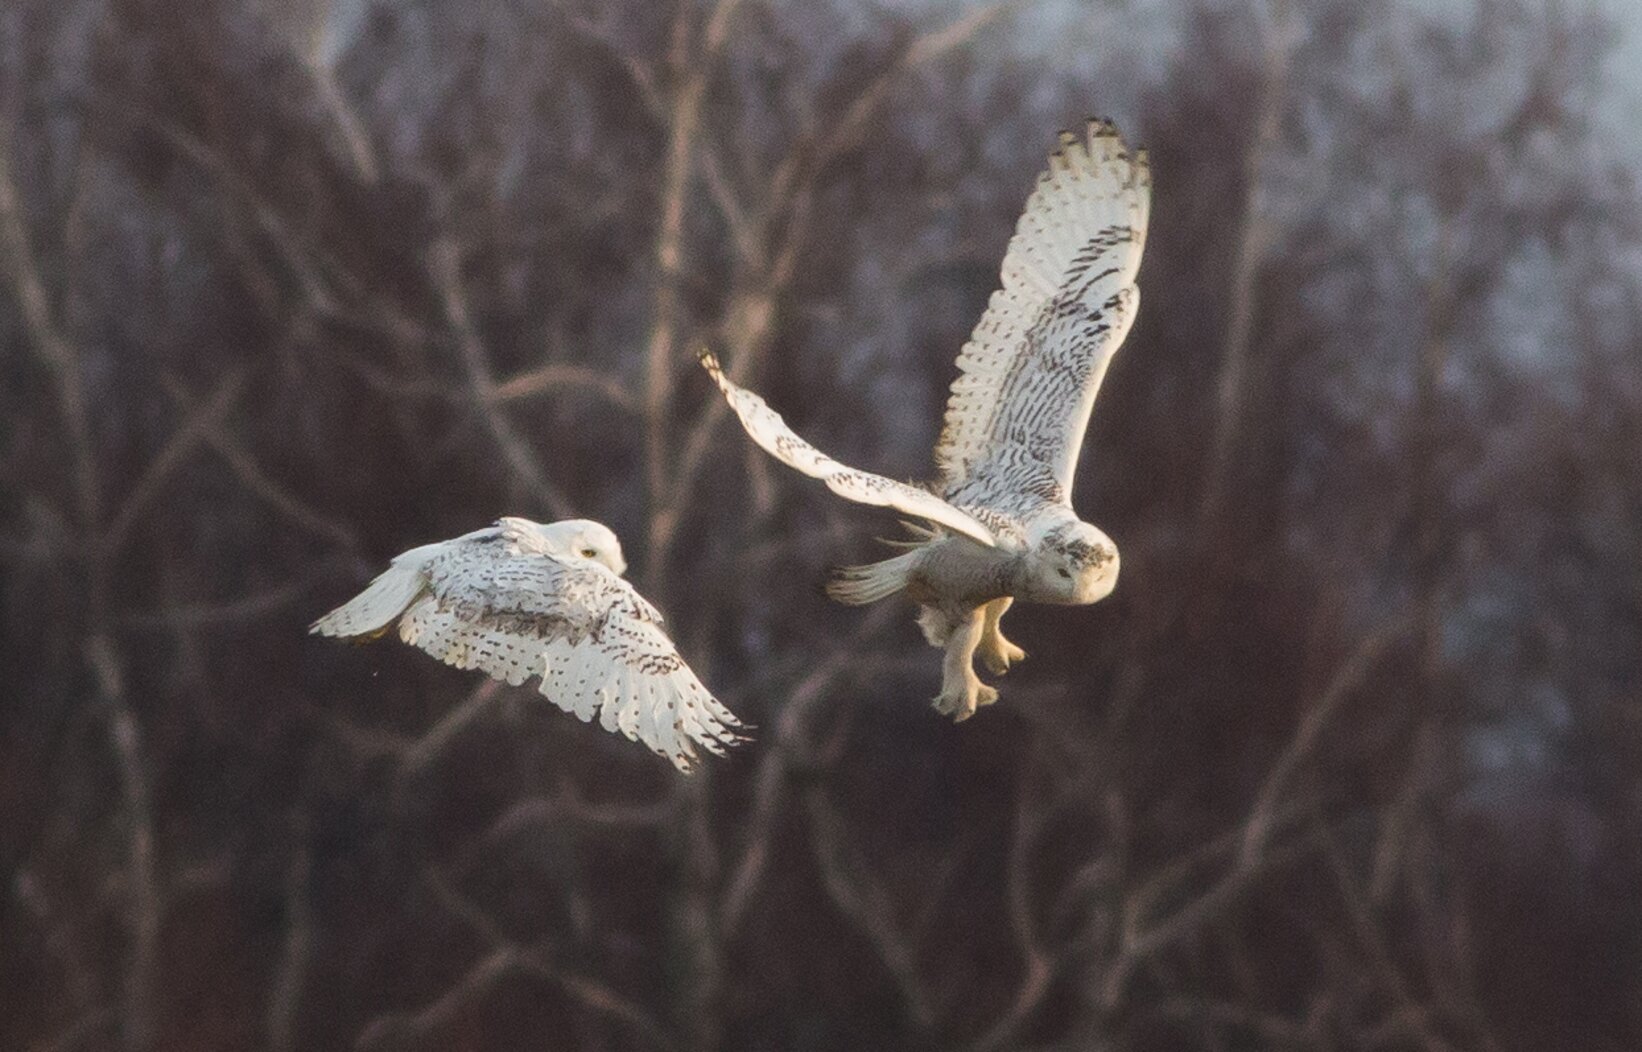 A rare sighting in most places in the continental U.S.: TWO Snowy Owls scuffle for turf, at Floyd Bennett Field in December 2013. Photo: Doug Gochfeld